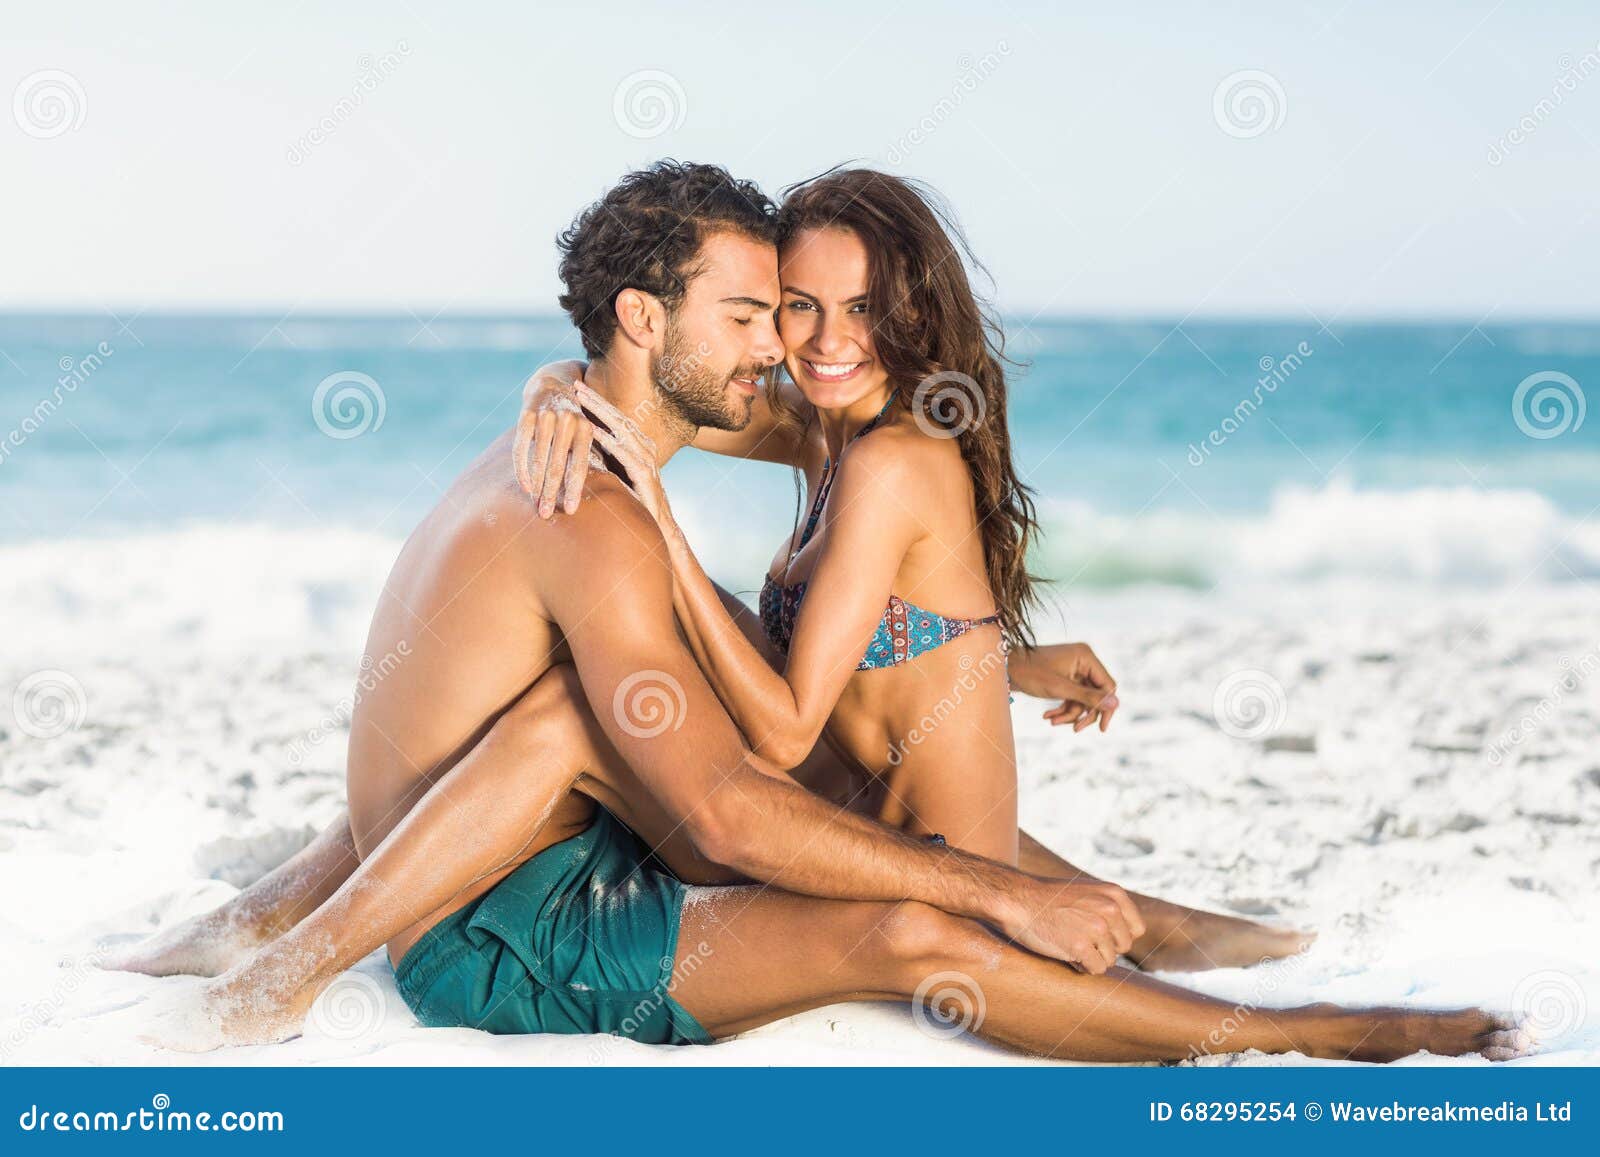 Cute Couple Hugging Sitting on the Beach Stock Photo - Image of ...